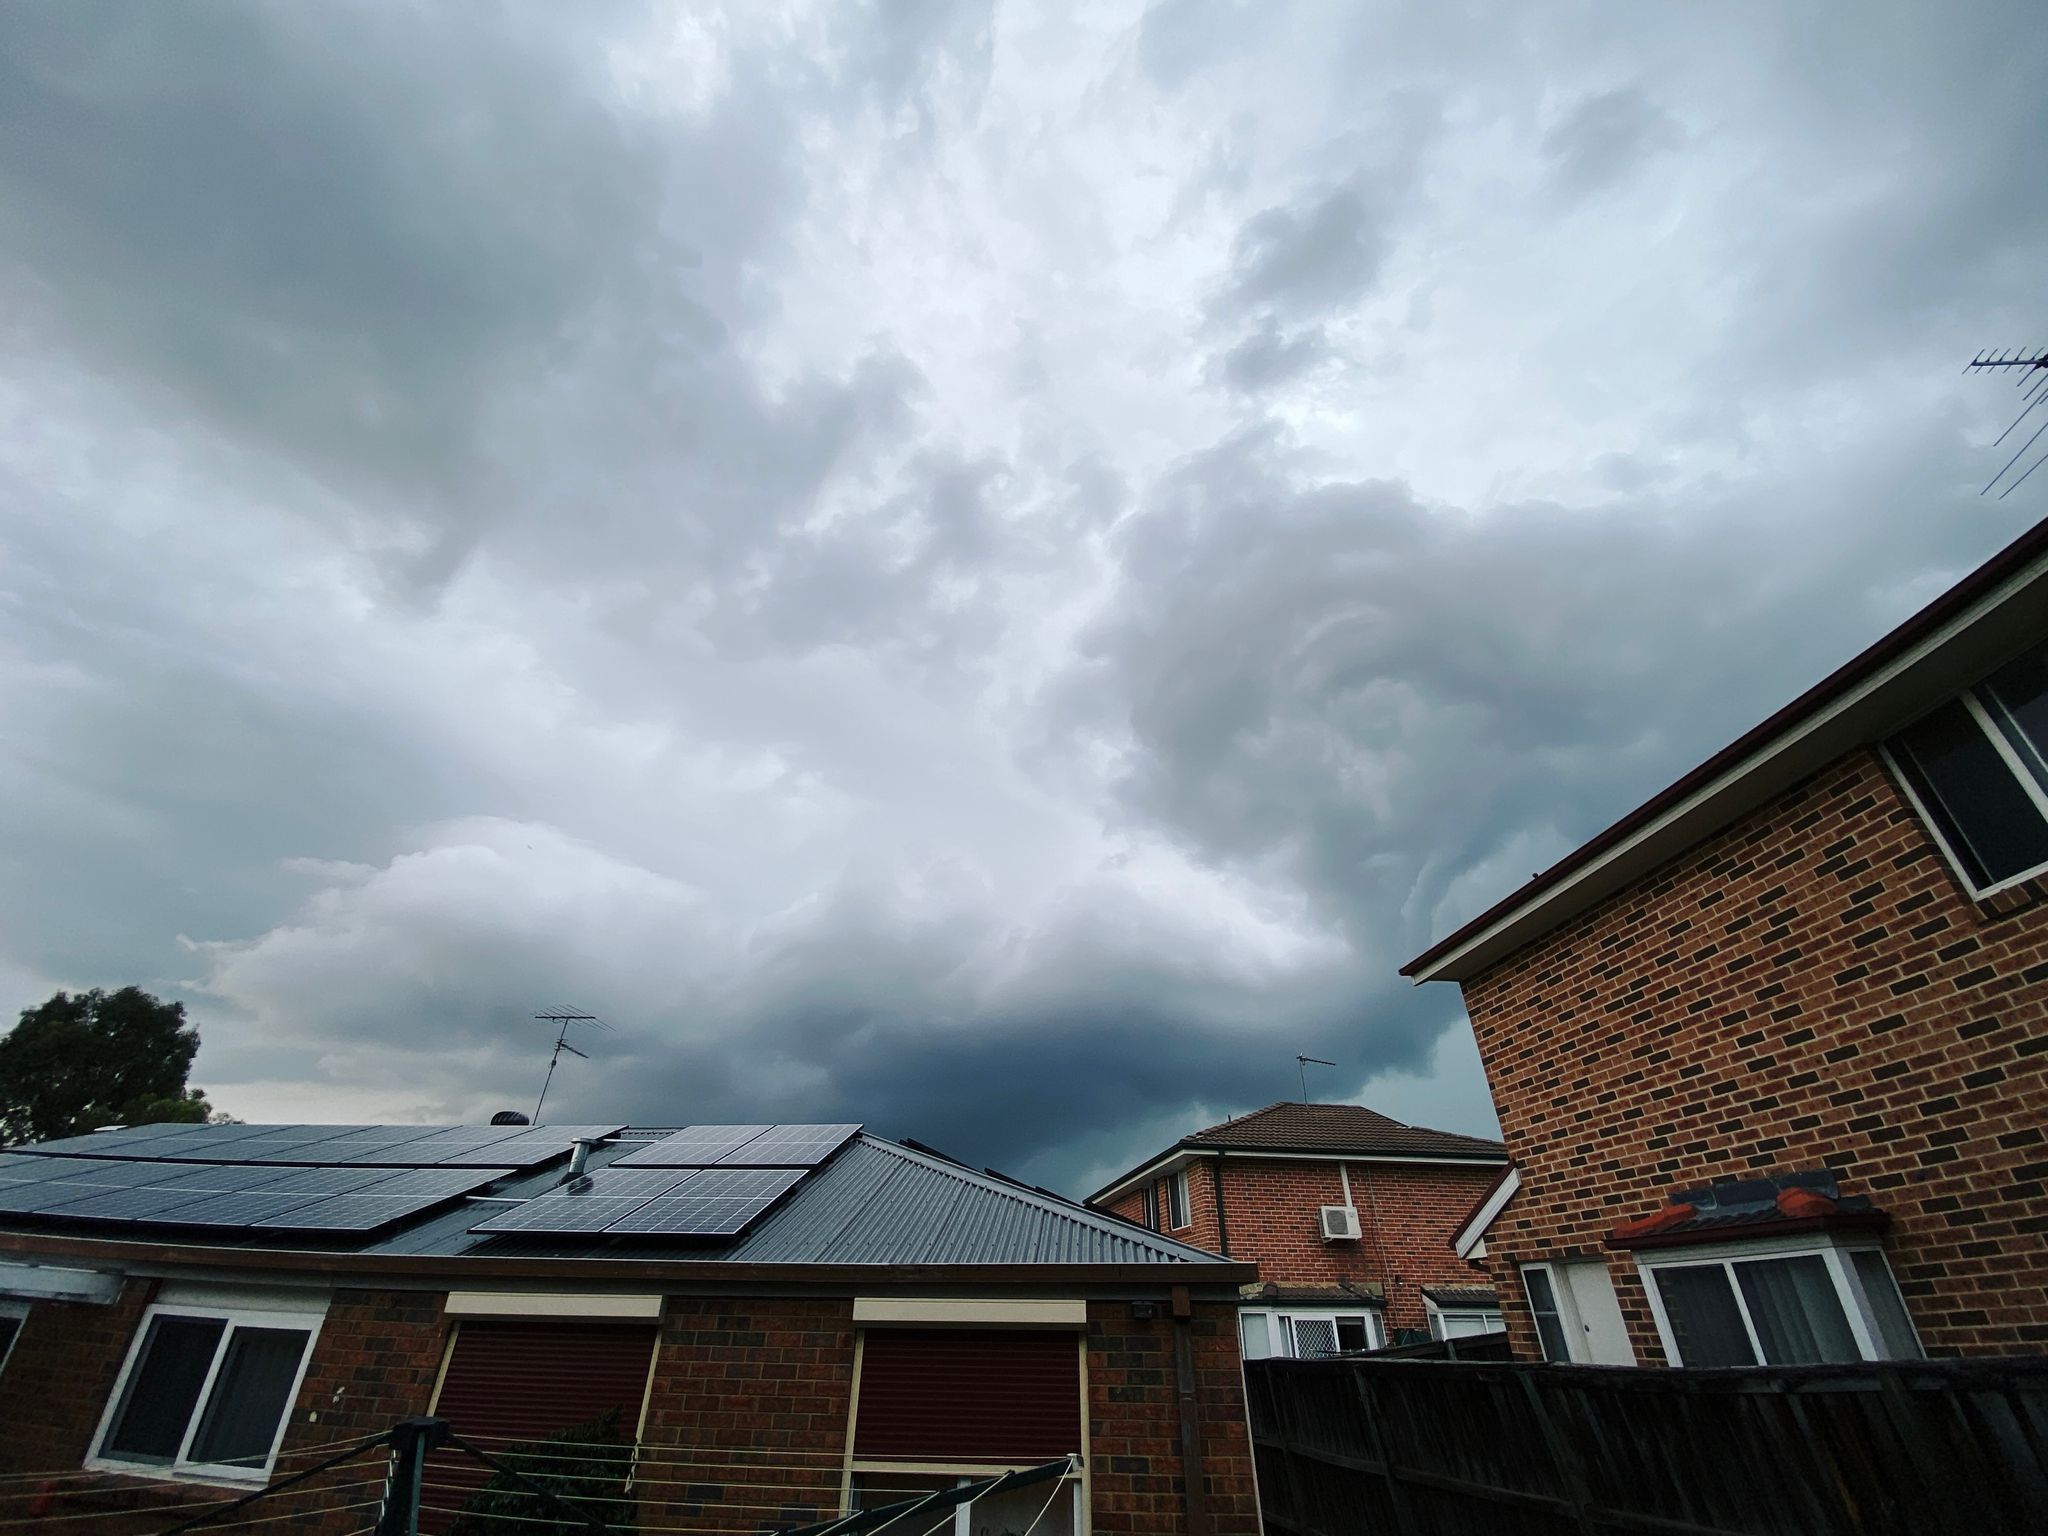 A photo of a VERY ominous-looking storm front over the top of some suburban houses.